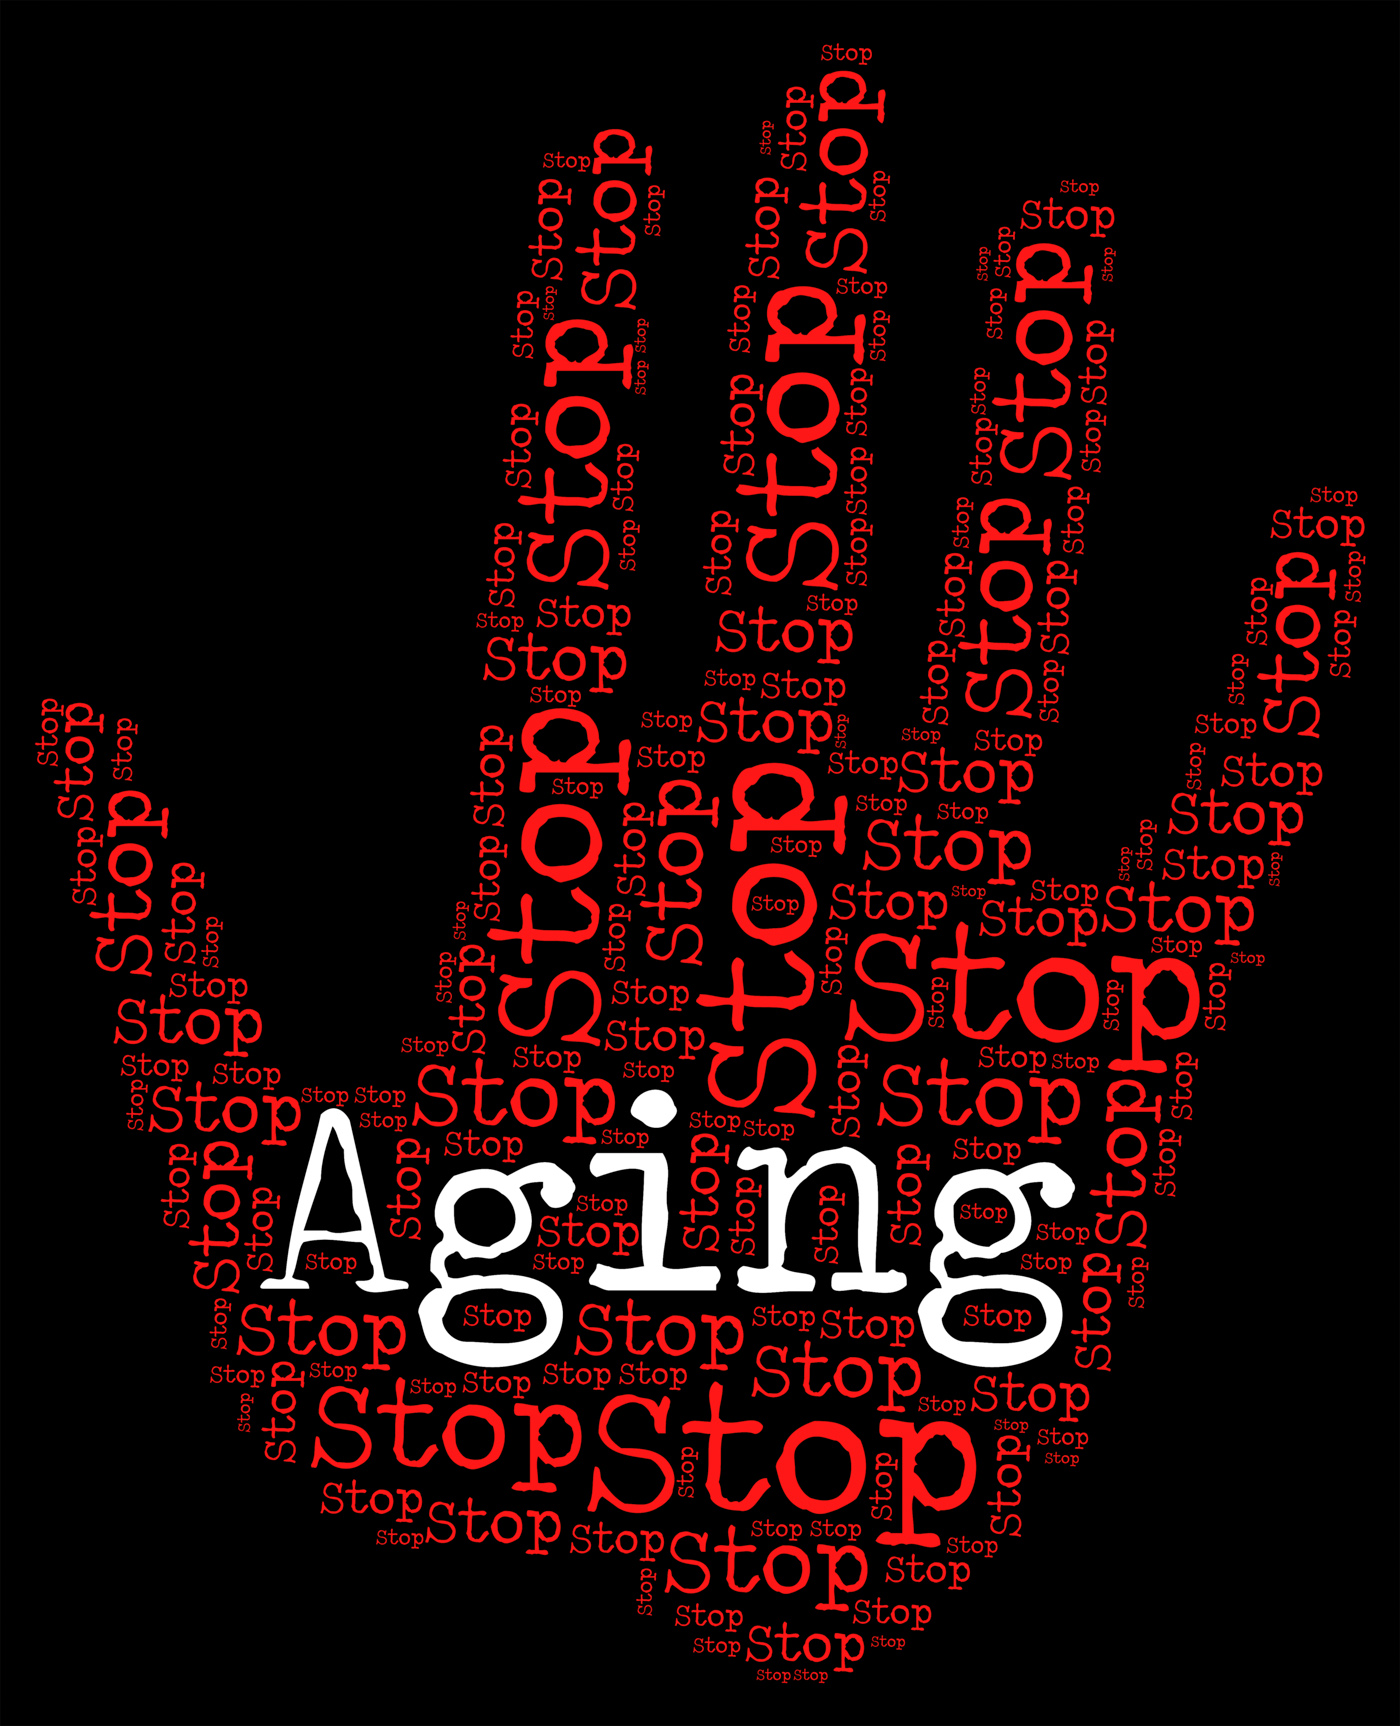 Stop aging shows getting old and caution photo